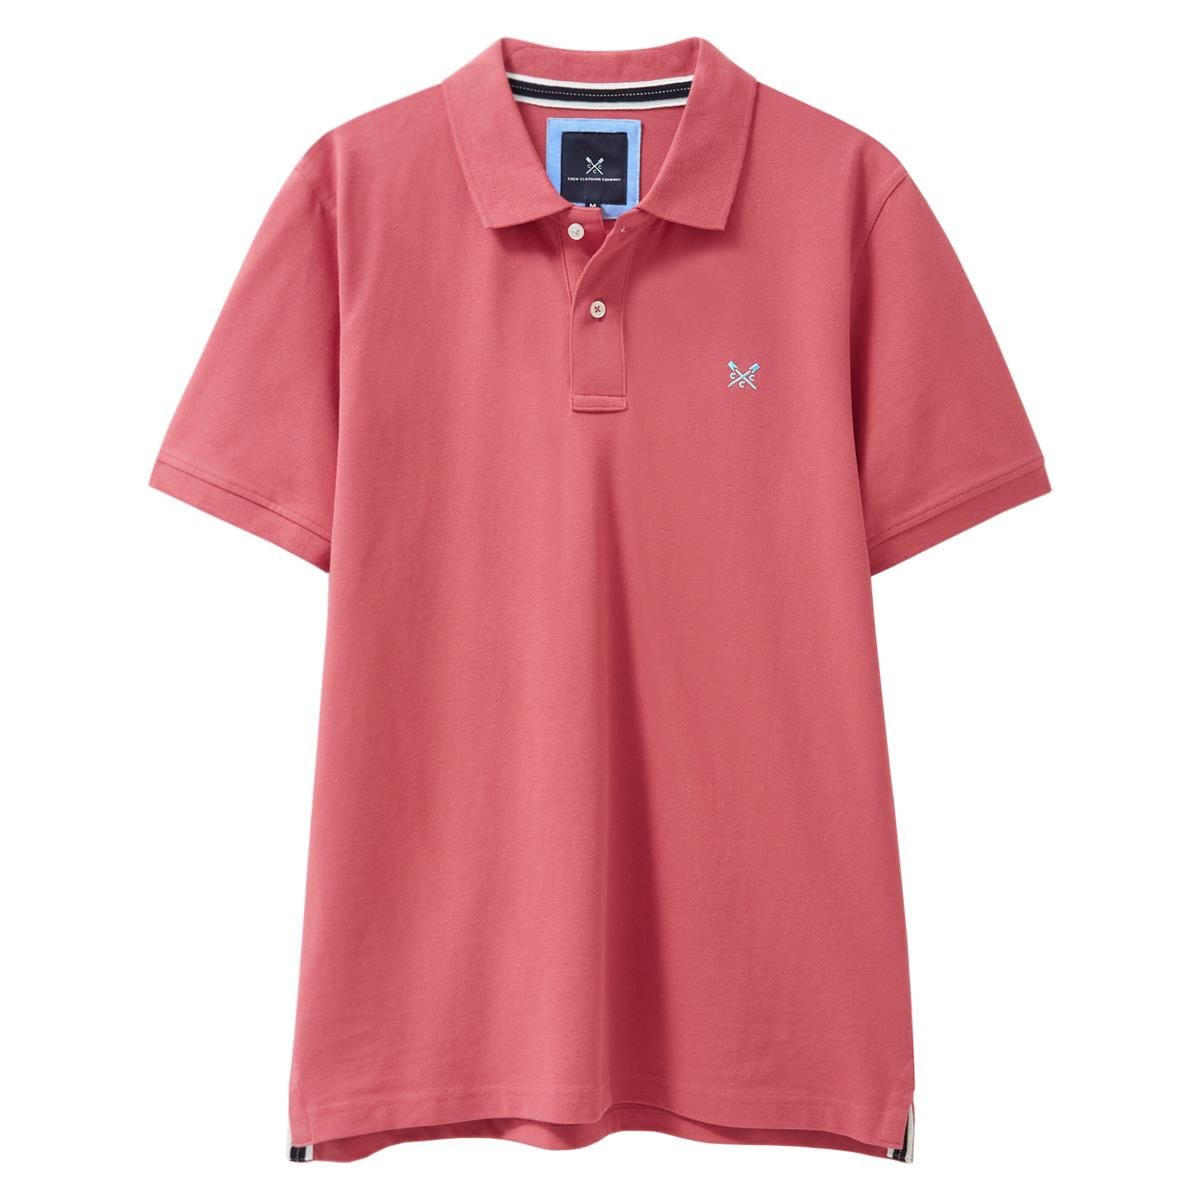 What's the PM reference for crew polo shirts?